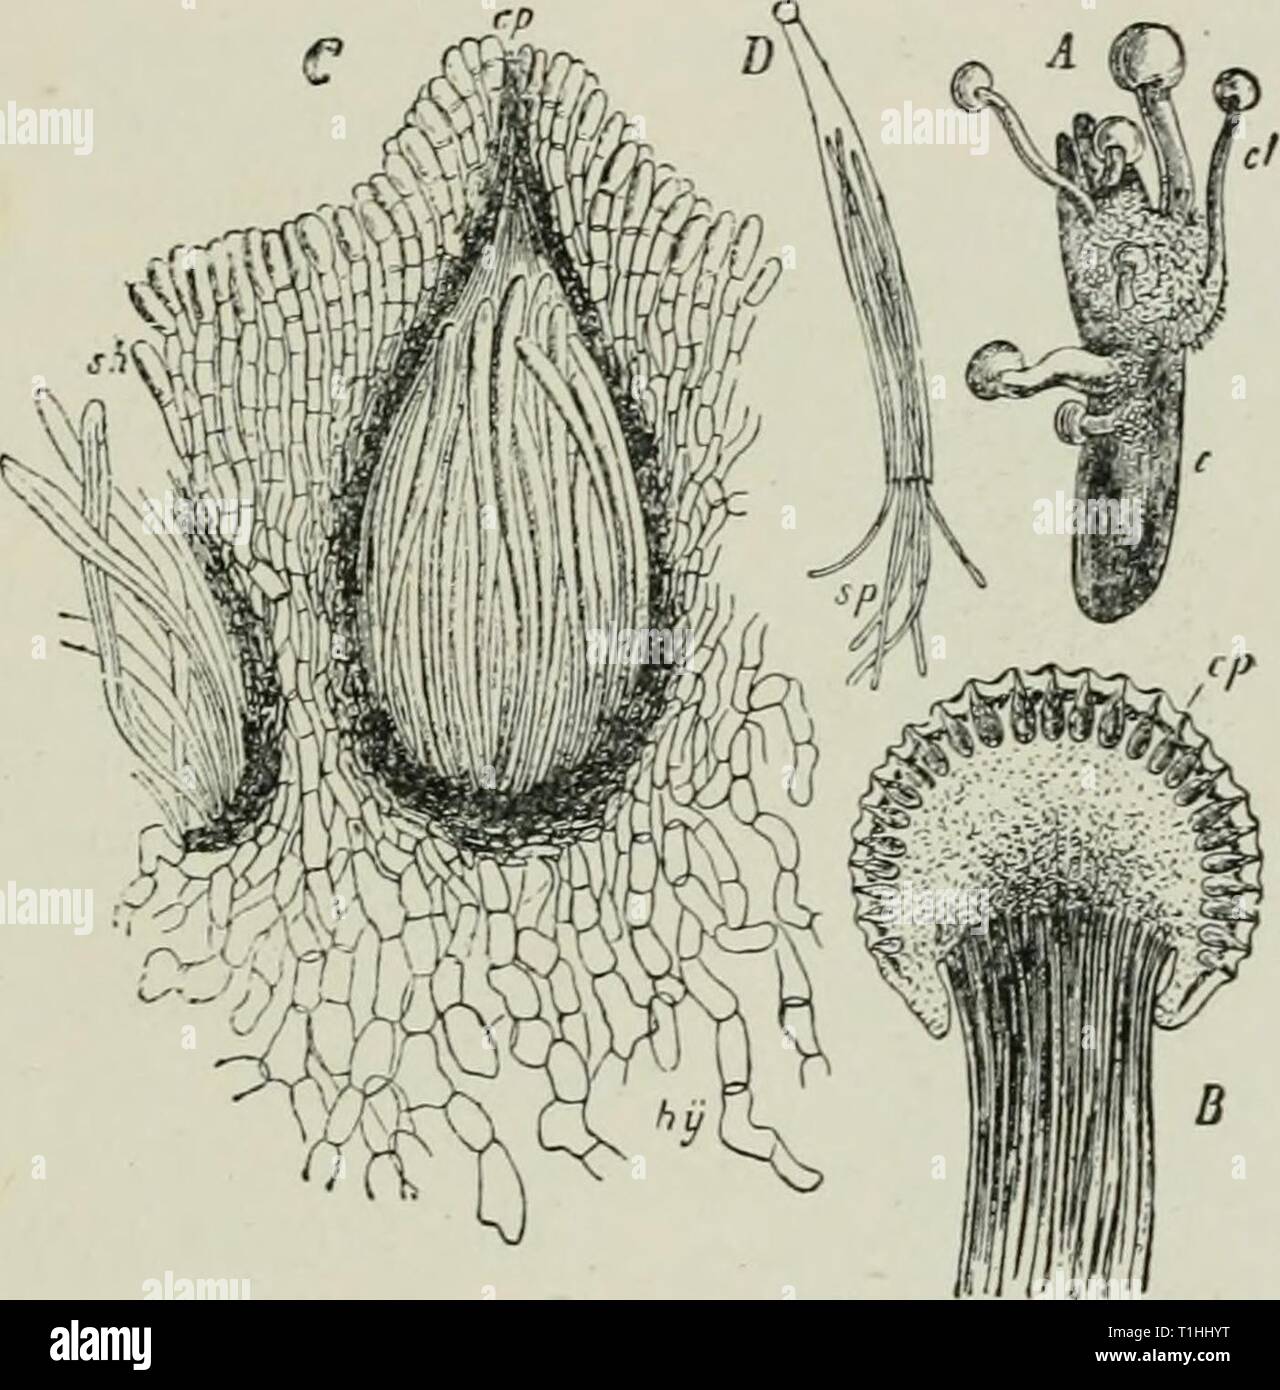 Diseases of plants induced by Diseases of plants induced by cryptogamic parasites; introduction to the study of pathogenic Fungi, slime-Fungi, bacteria, & Algae  diseasesofplant00tube Year: 1897  CLAVICEPS. 193 conidiophores. A very sweet fluid, the so-called ' houey-devv,' is separated from the sphacelia; this attracts insects, which carry the conidia to other flowers. Since the conidia aie capable of immediate germination, and give rise to a mycelium which penetrates through the outer coat of the ovary, the disease can be quickly disseminated during the flowering season of the grasses. After Stock Photo